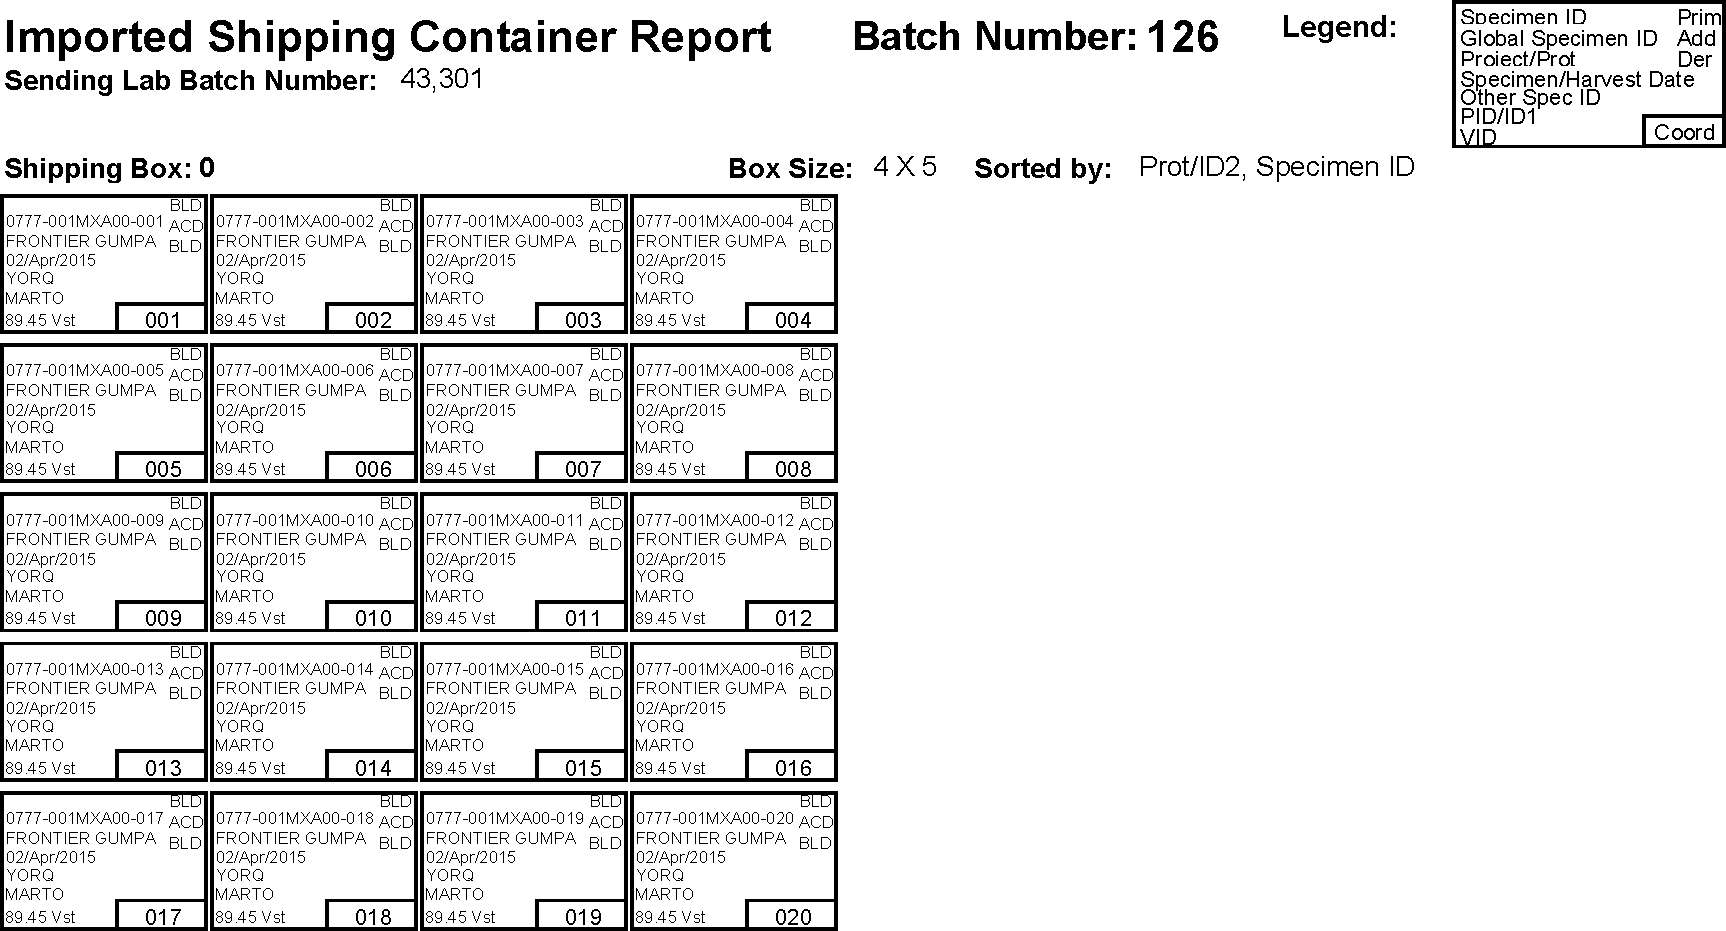 Screen image: The shipping container report.